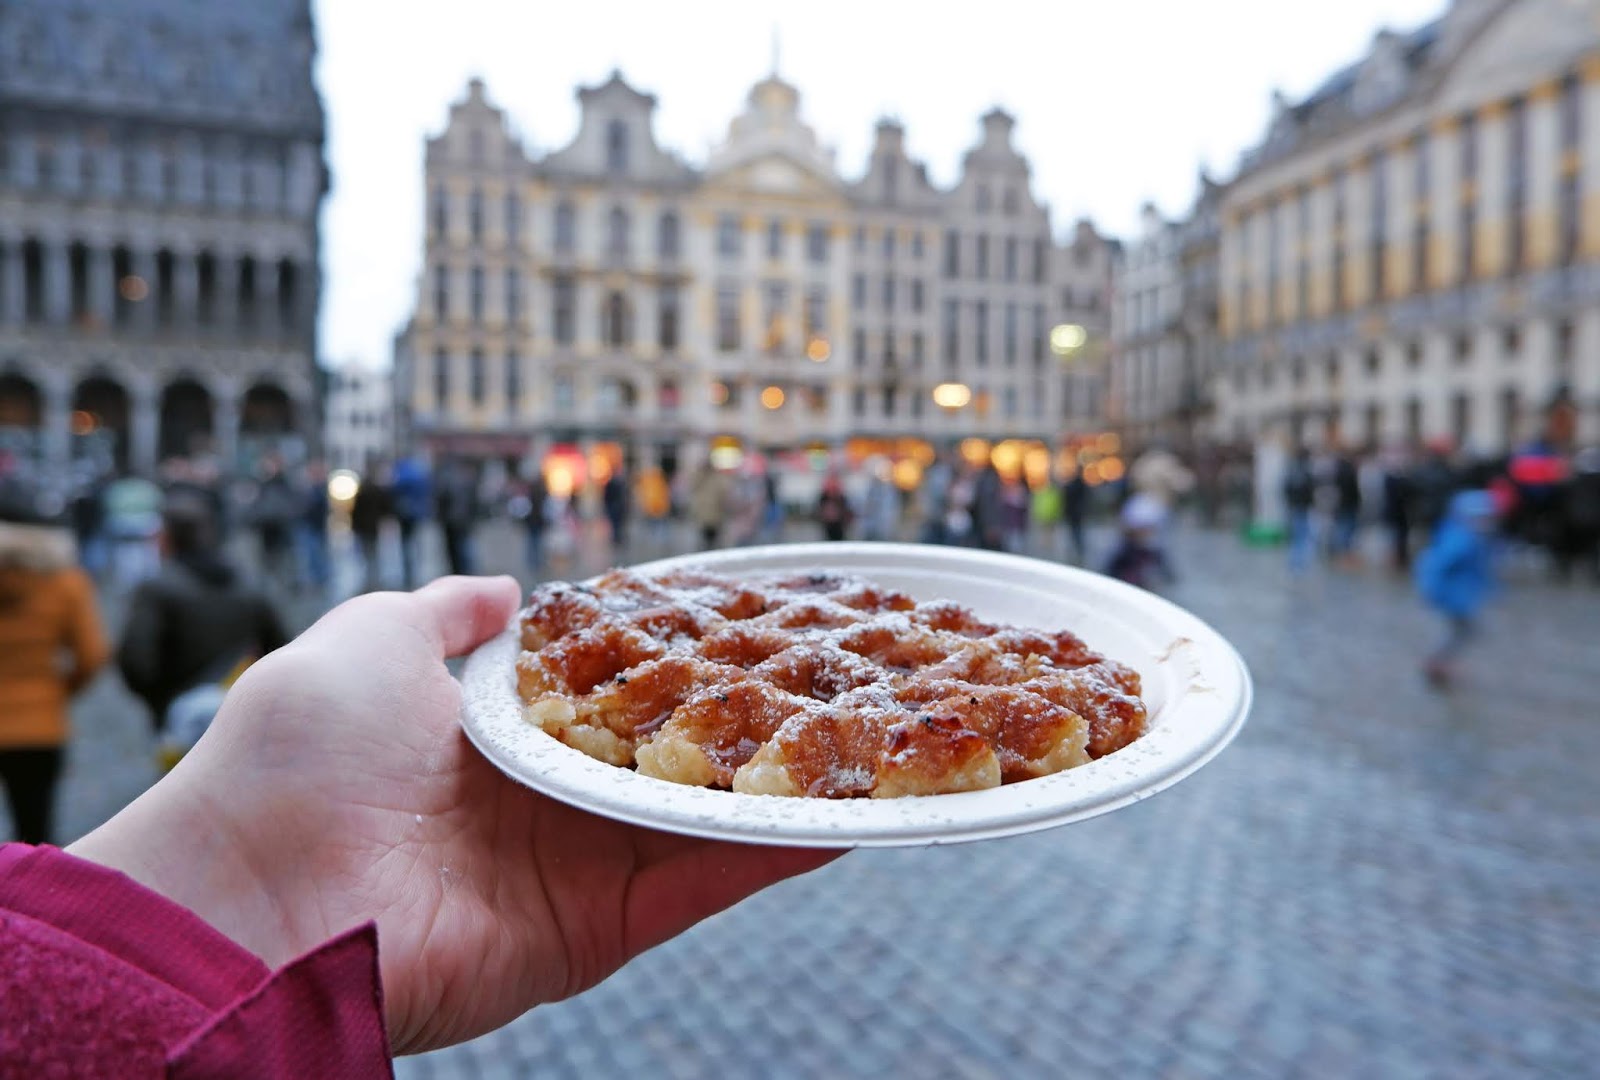 Eating a Liege waffle in the Grand Place, Brussels